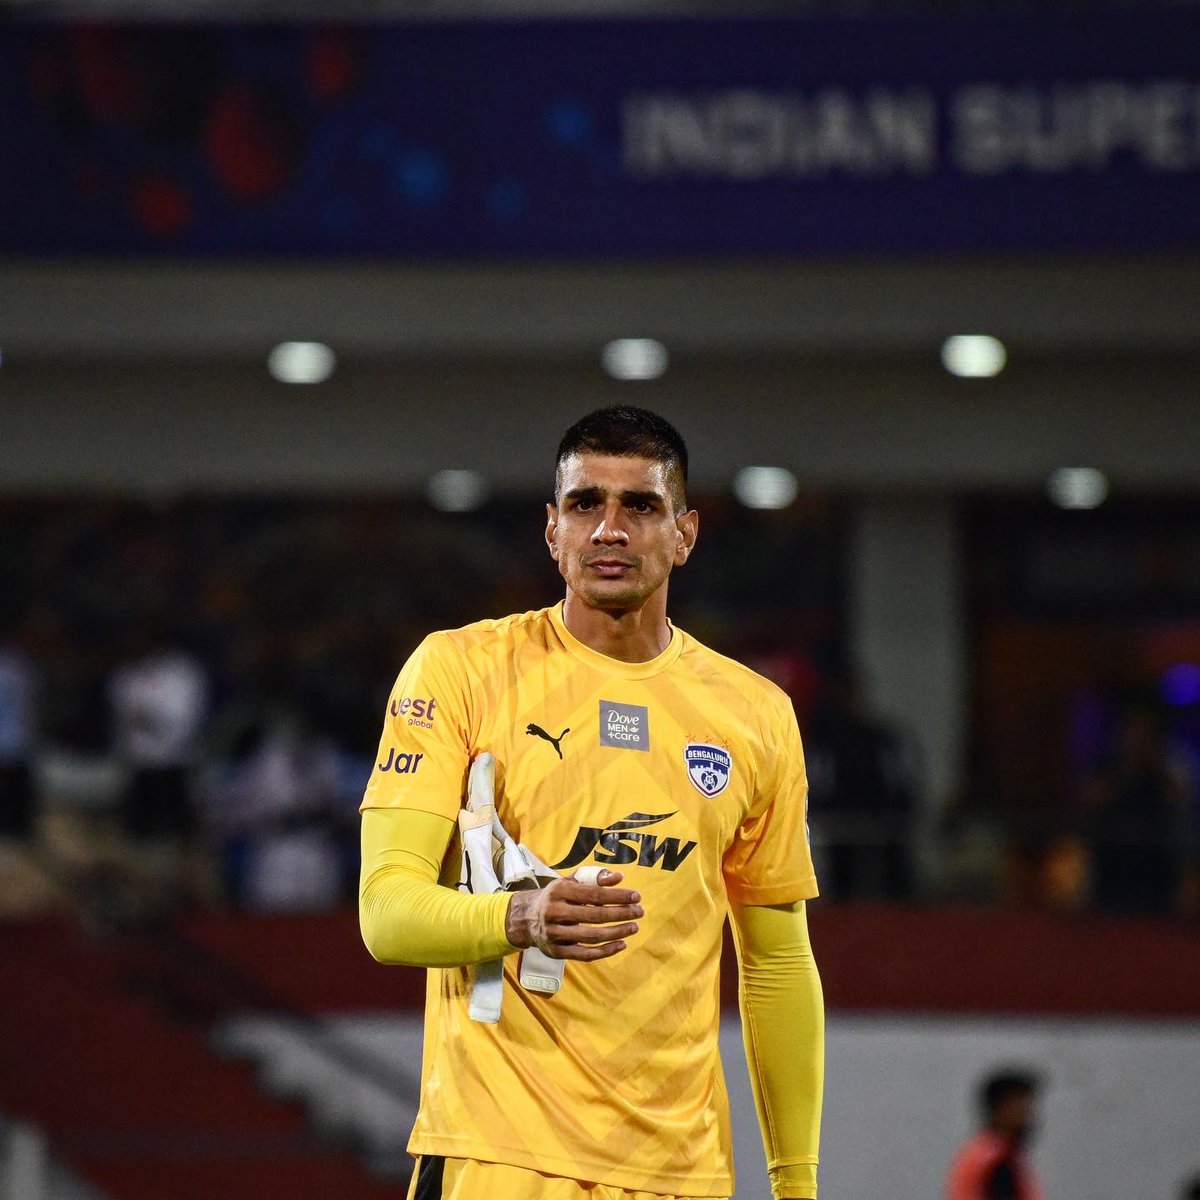 Proud to achieve my 40th clean sheet in BFC colours. It was a tough game against a familiar foe last night. Would have loved to grab all 3 points at home but we keep working as a team and move onwards. #WeAreBFC